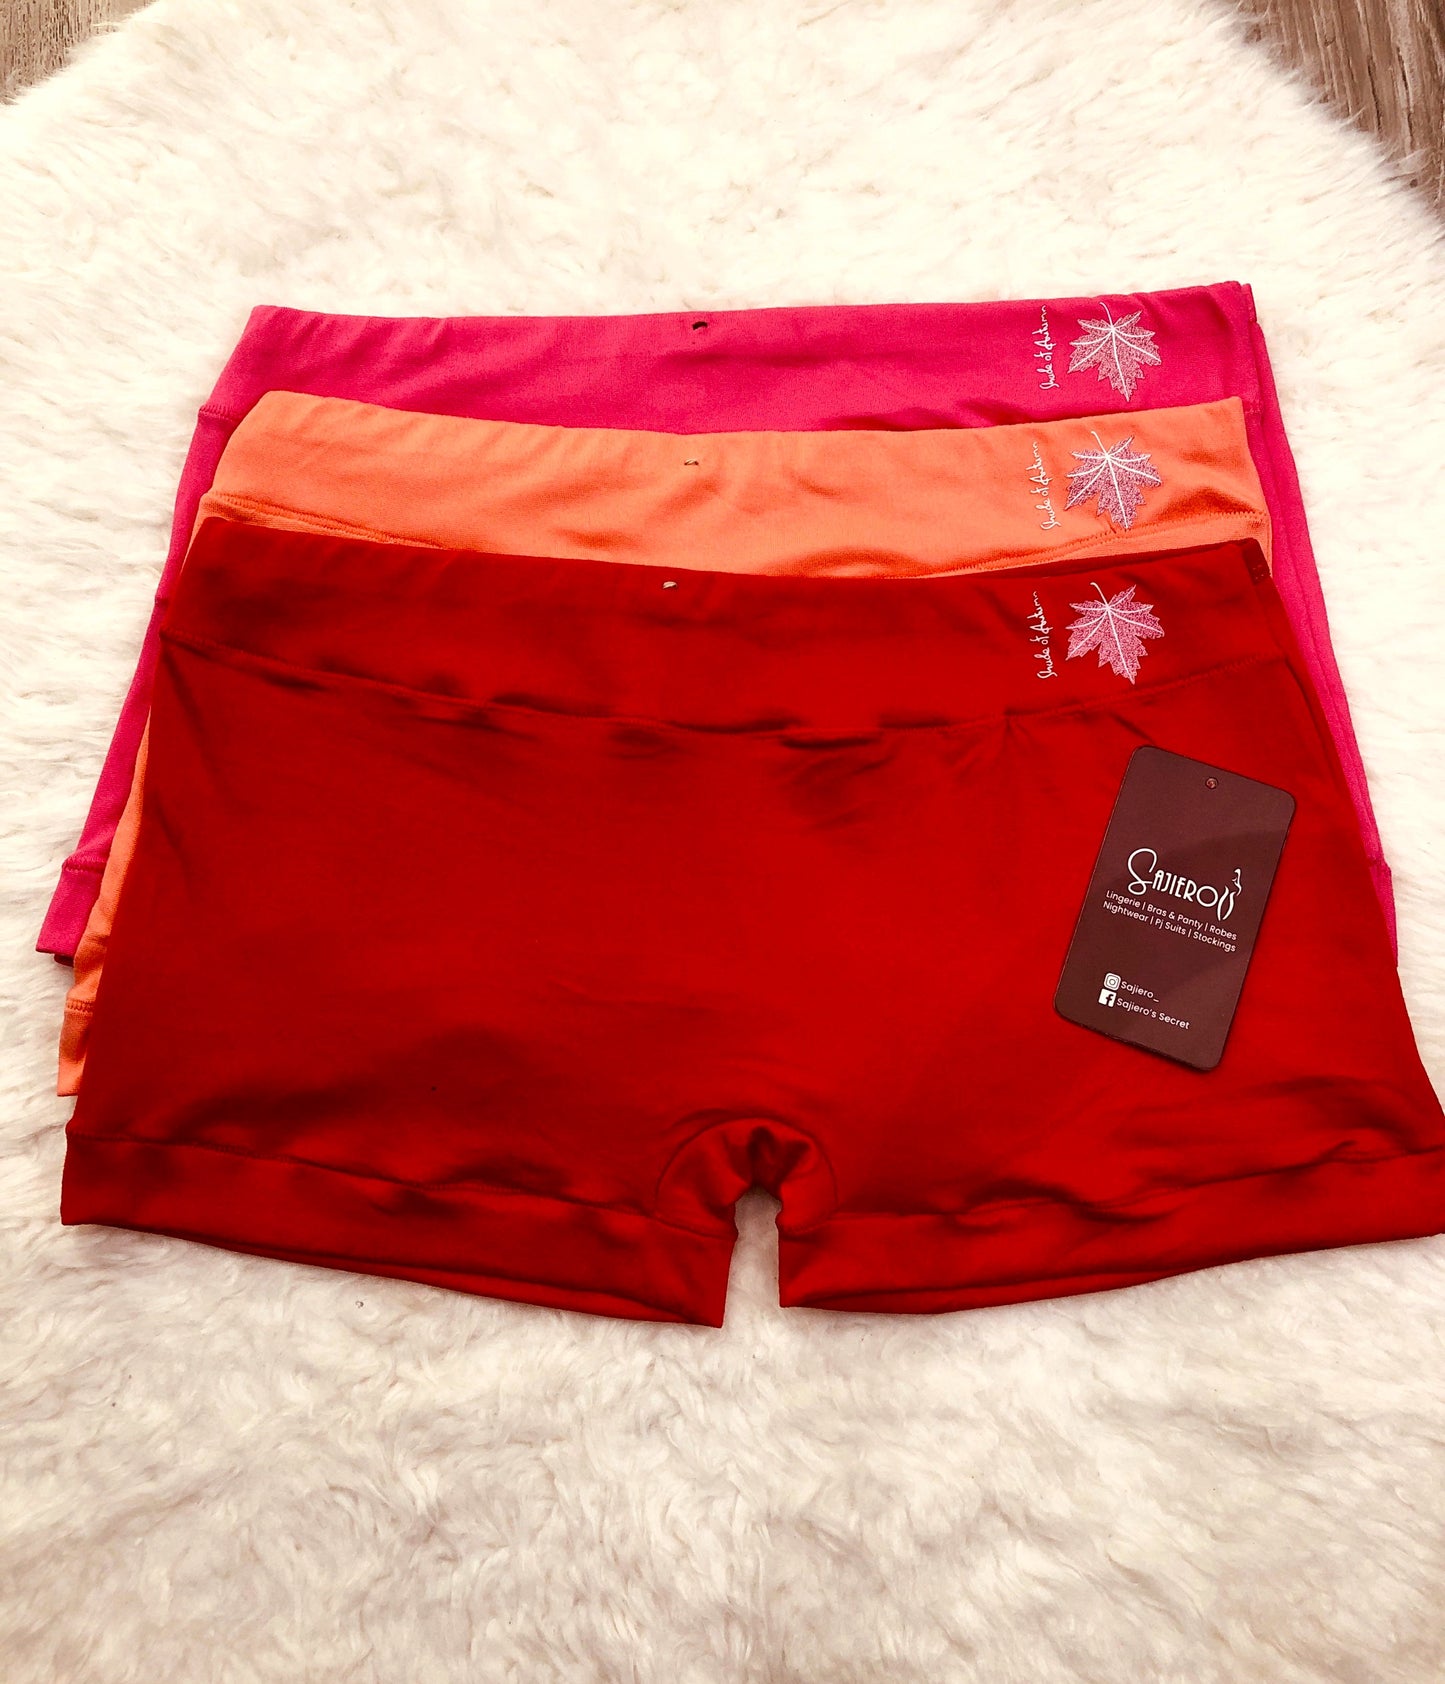 Sajiero Plain Cotton Boxer Panty good quality leakproof panties for women and ladies price in pakistan online 